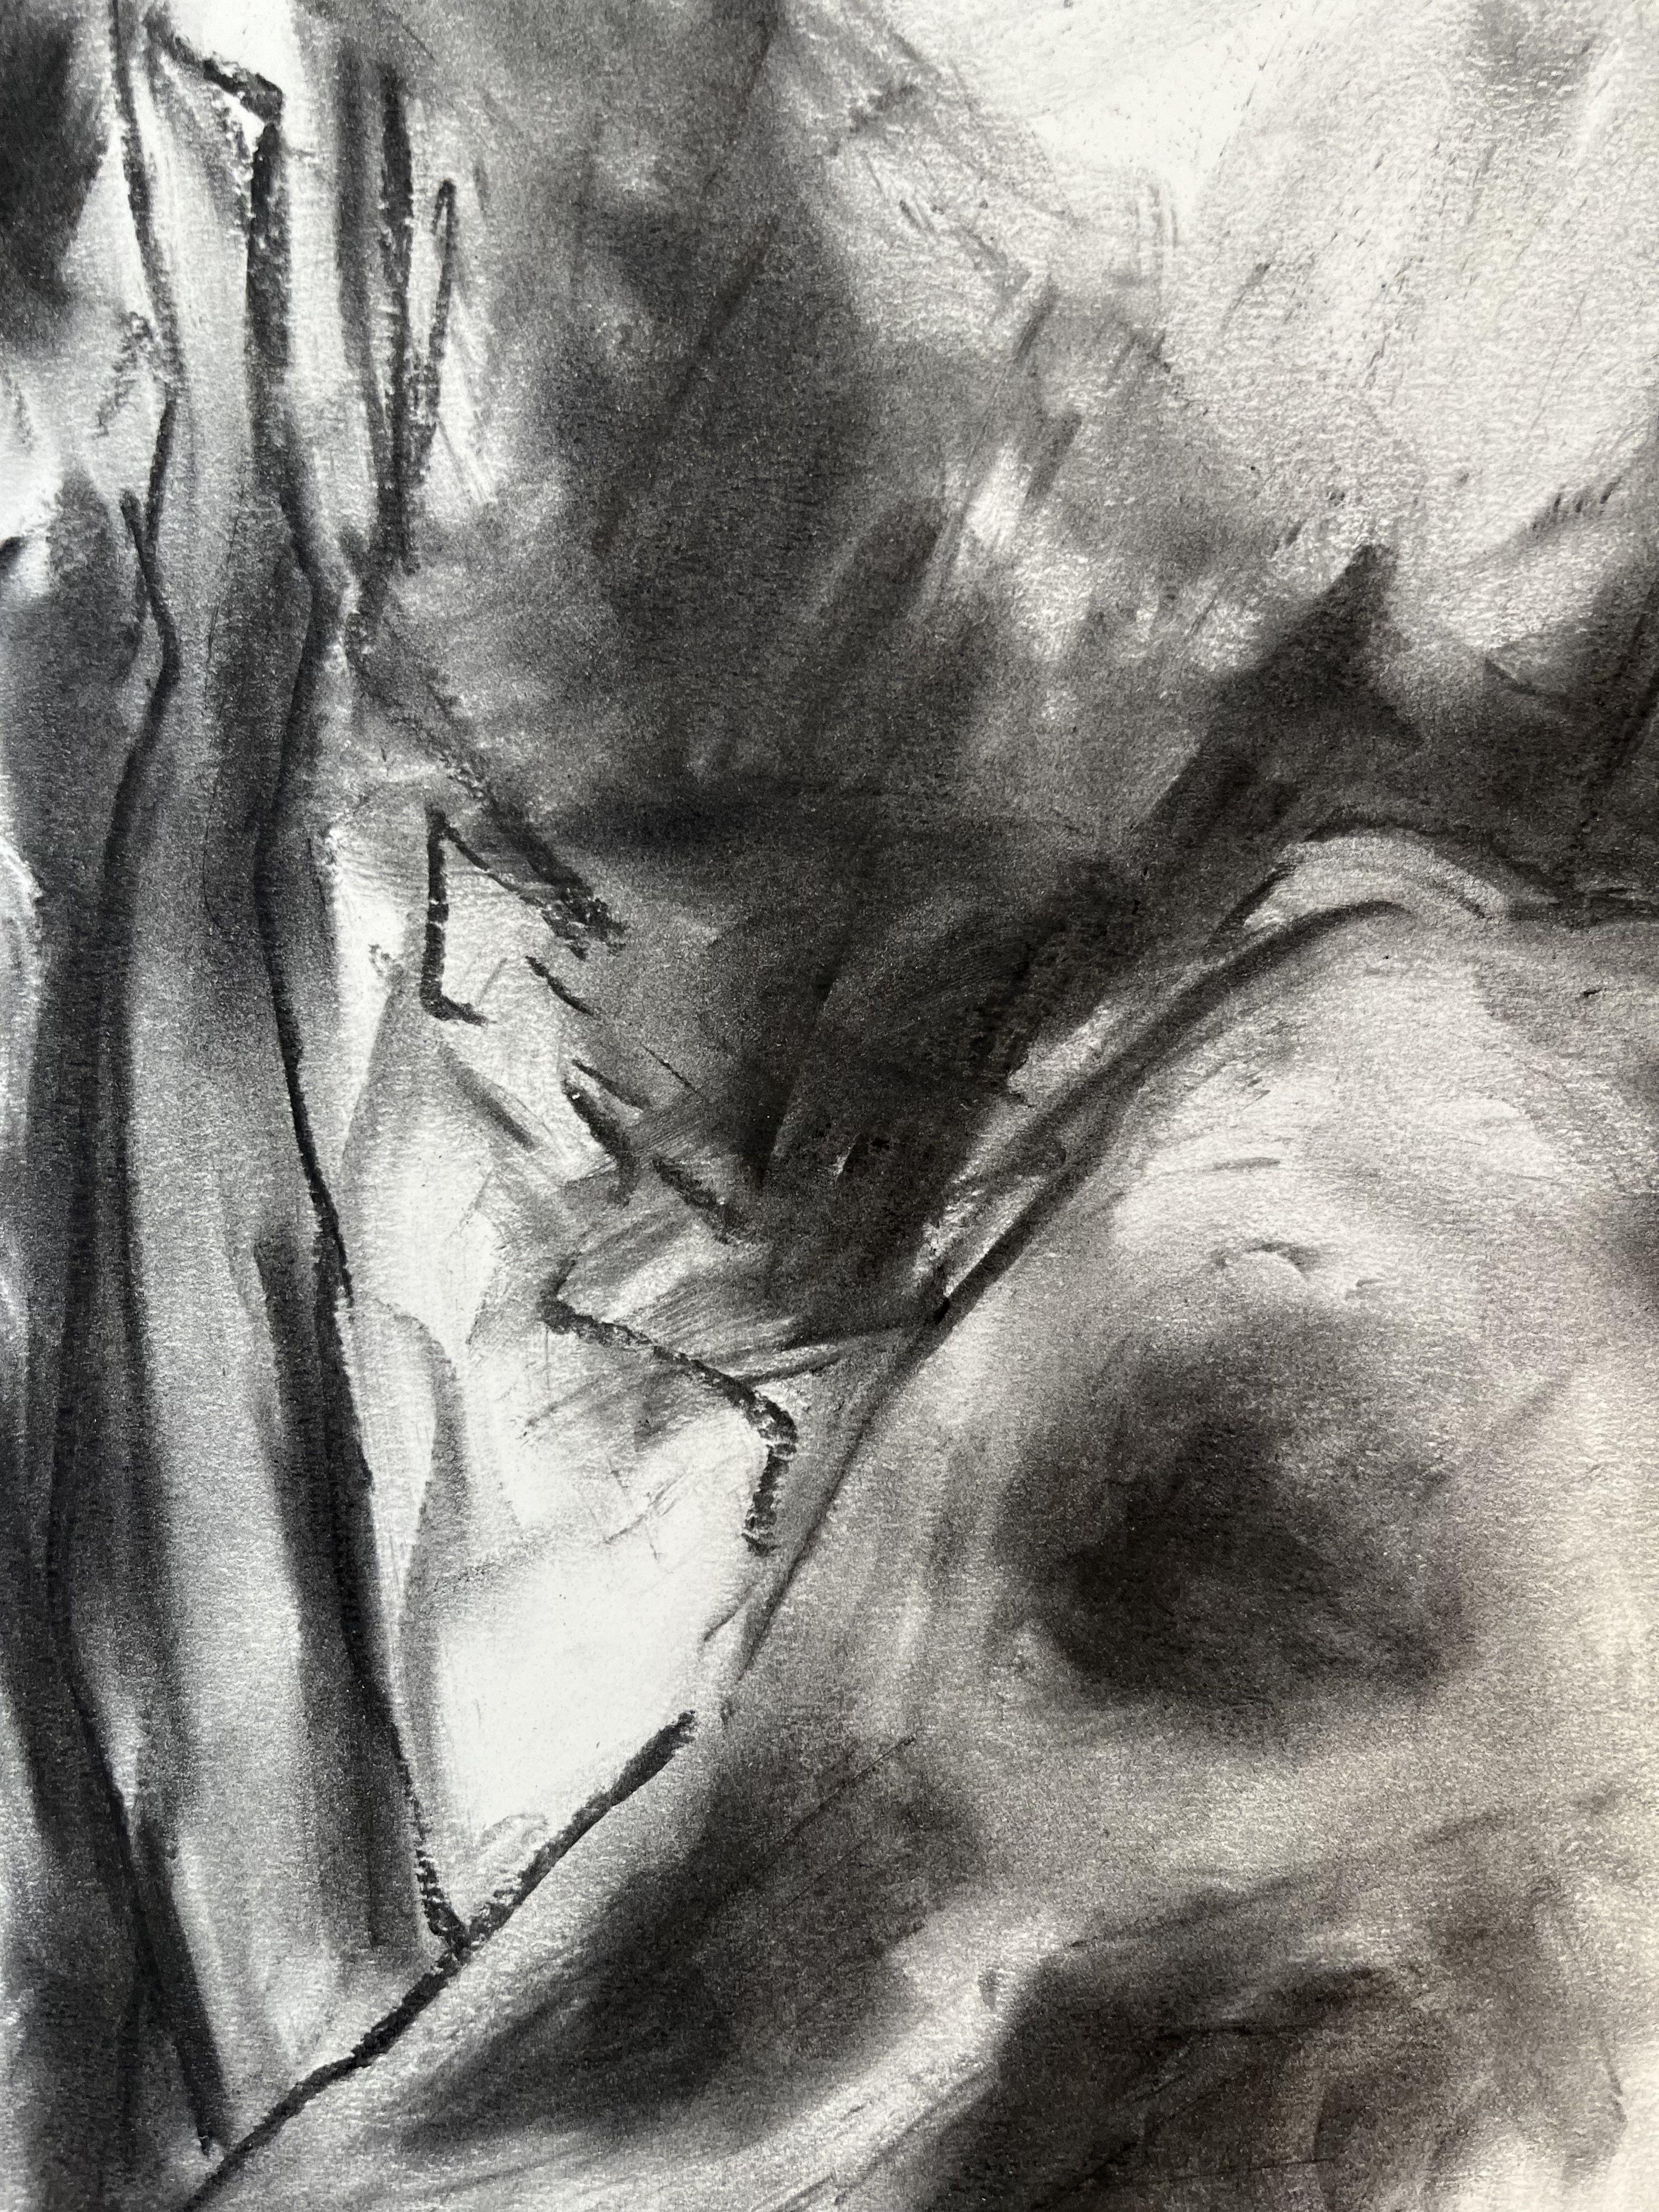 CrackâEs, Drawing, Charcoal on Paper - Impressionist Art by James Shipton